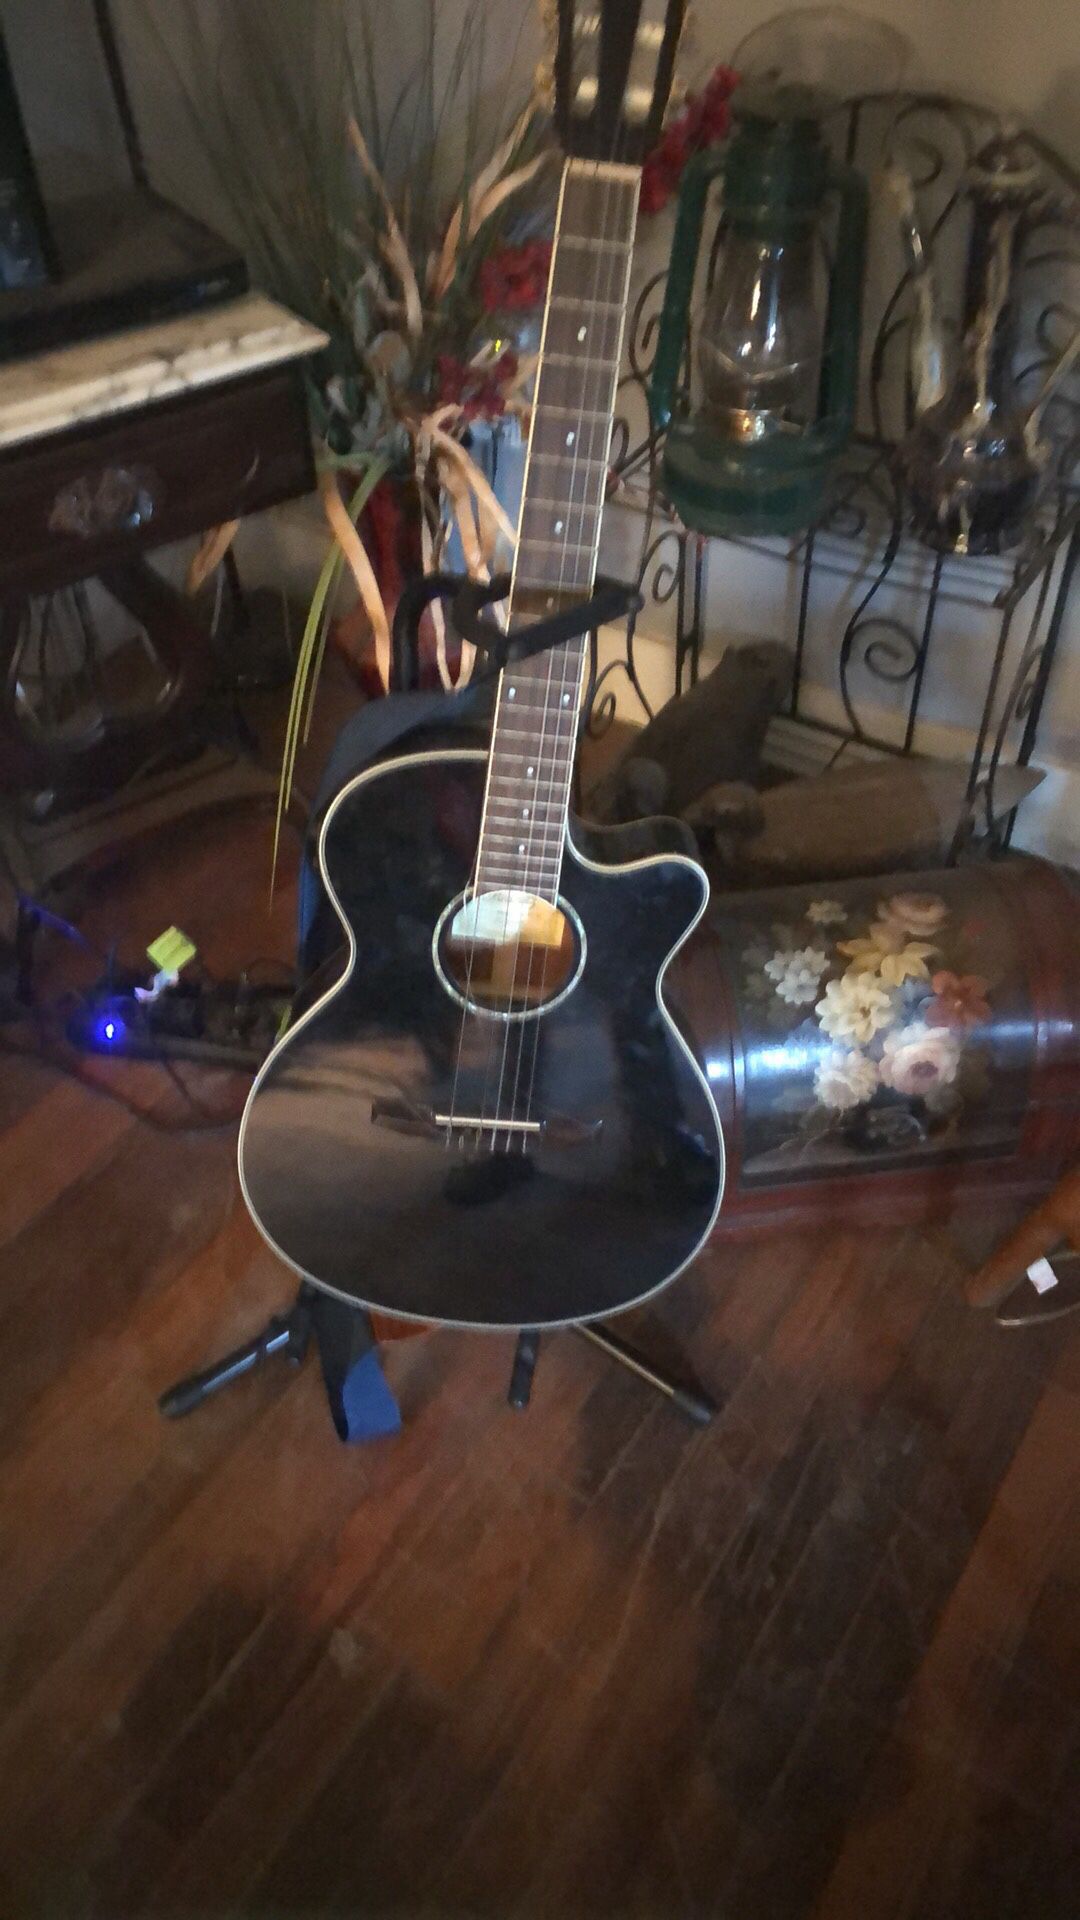 Ibanez acoustic/electric guitar